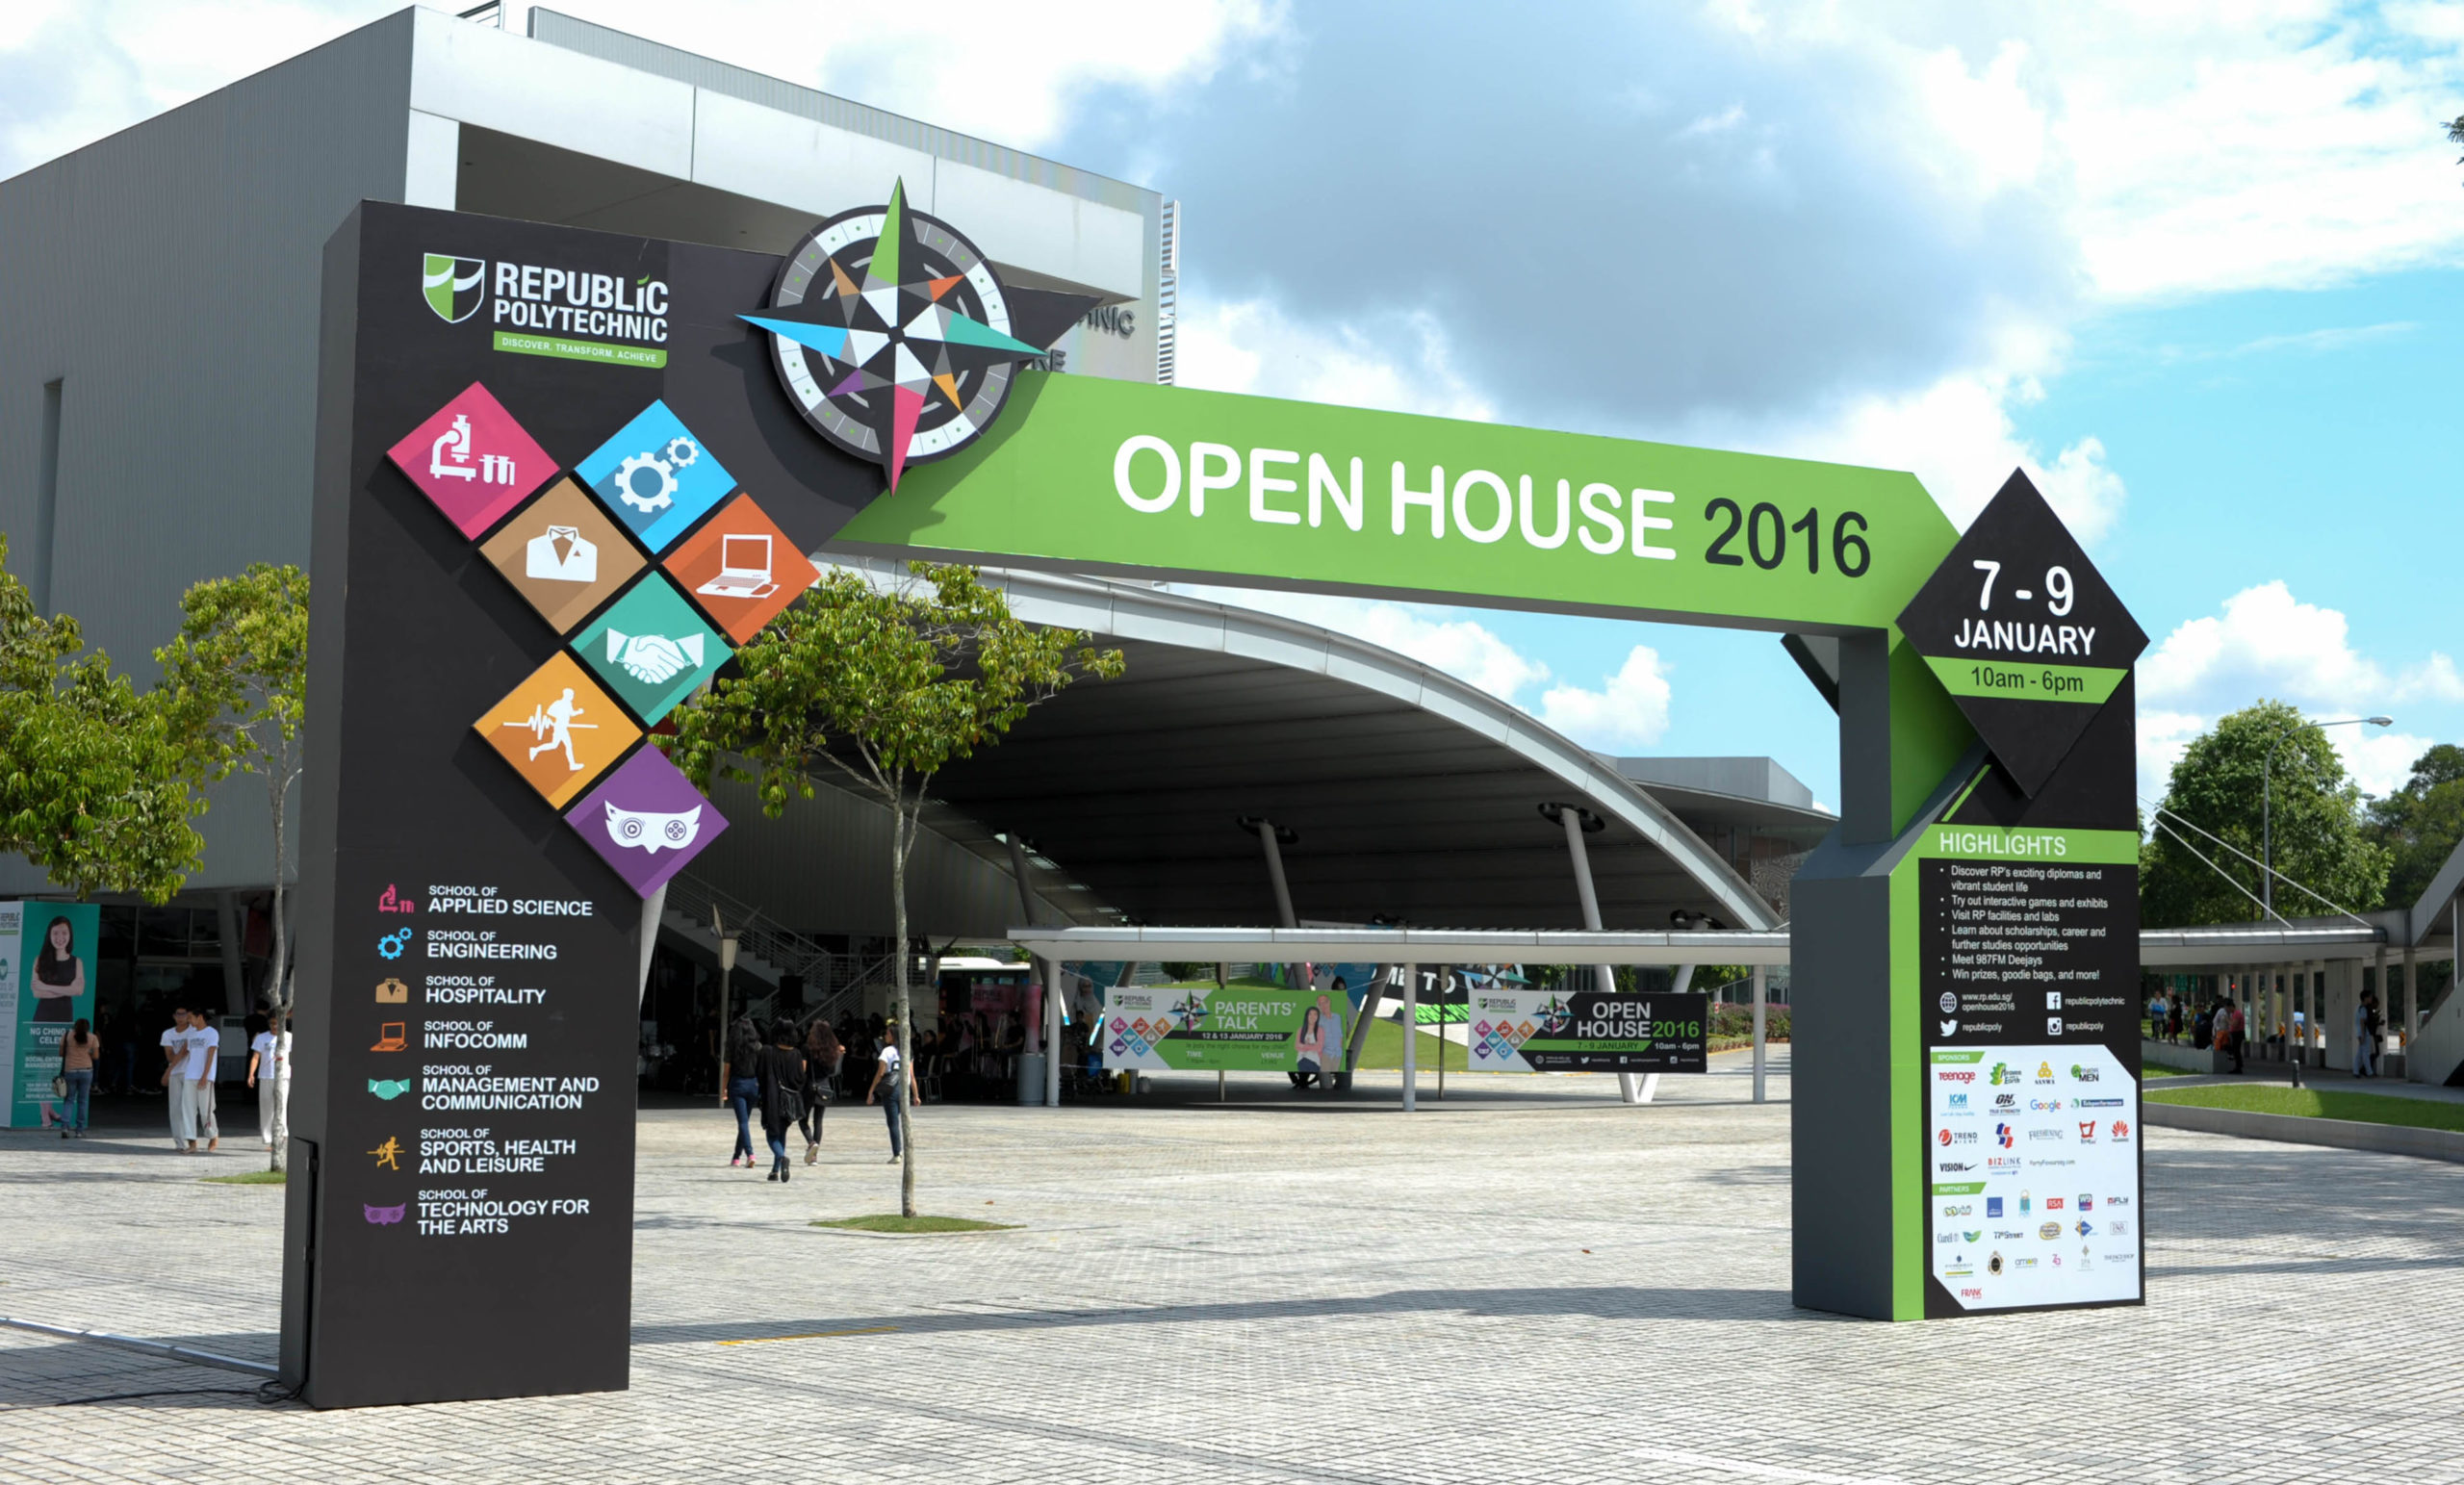 media production coverage showing the entrance of republic polytechnic's open house event in 2016